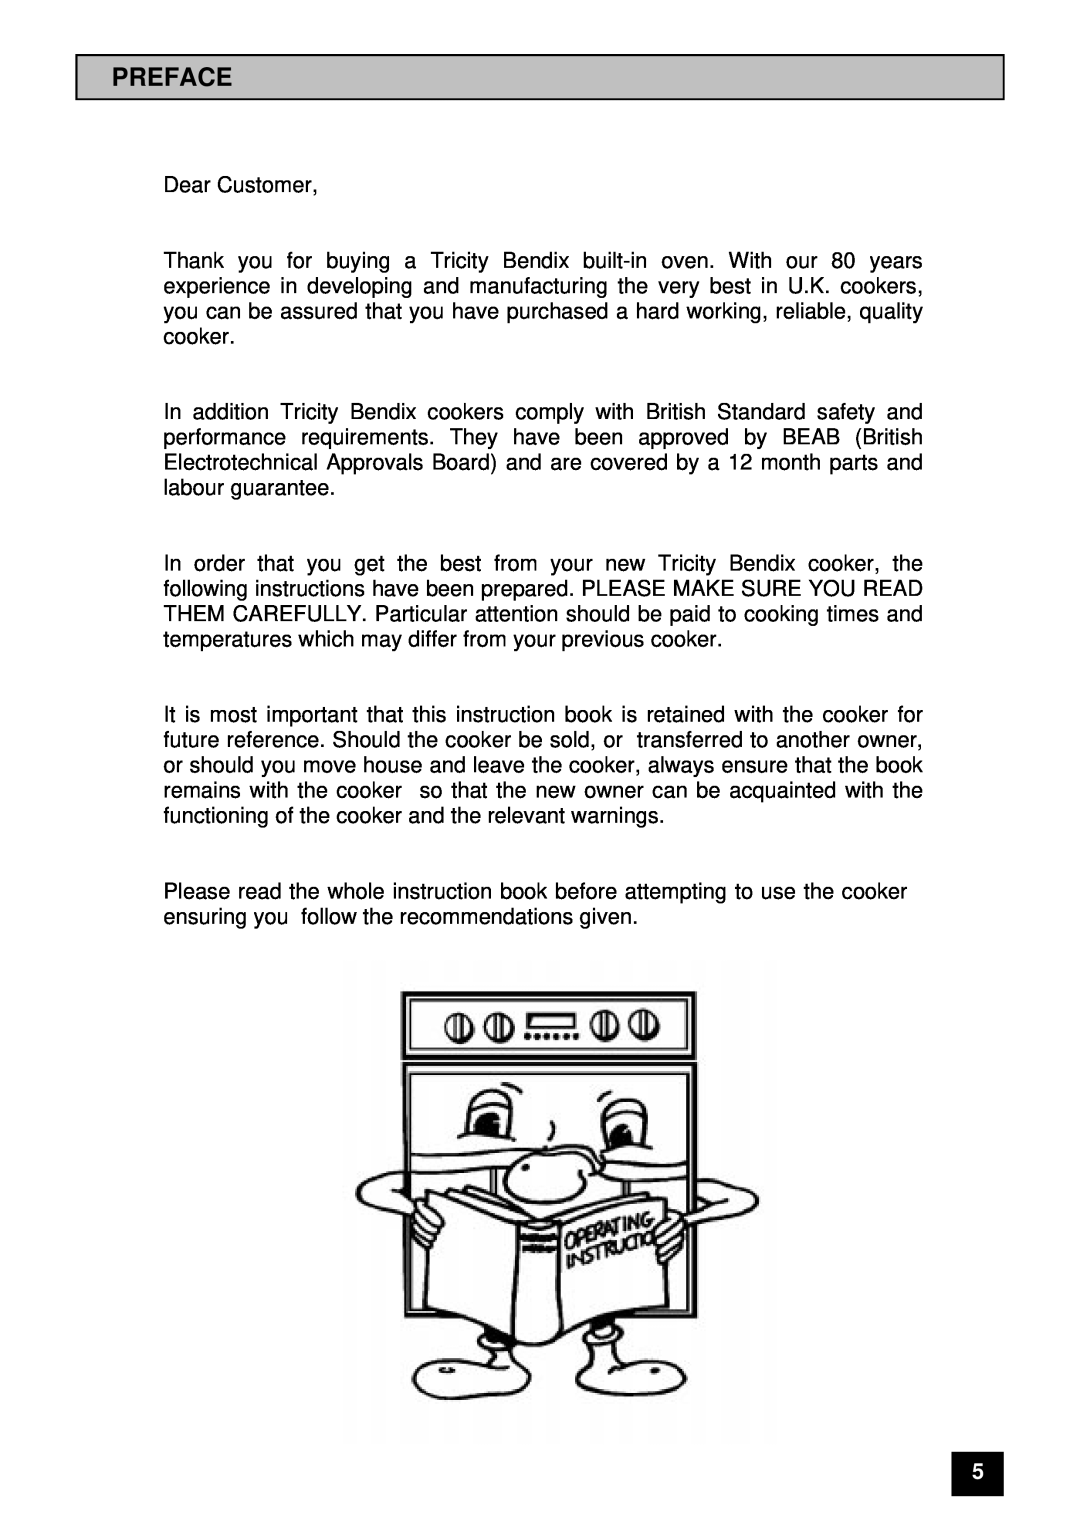 Tricity Bendix SUSSEX, SOMERSET installation instructions Preface 